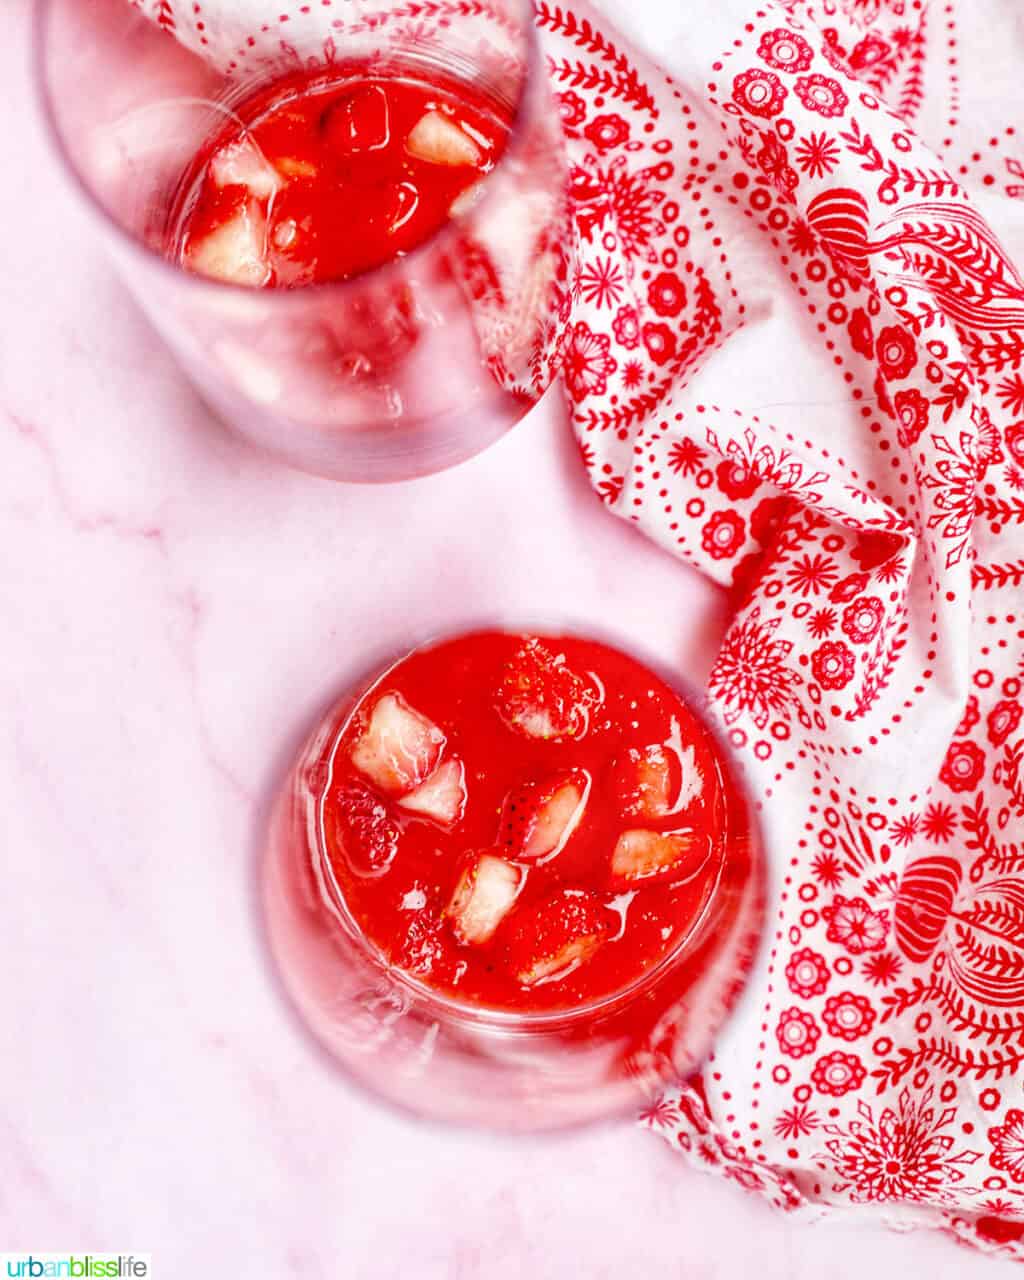 strawberies added to puree in glasses